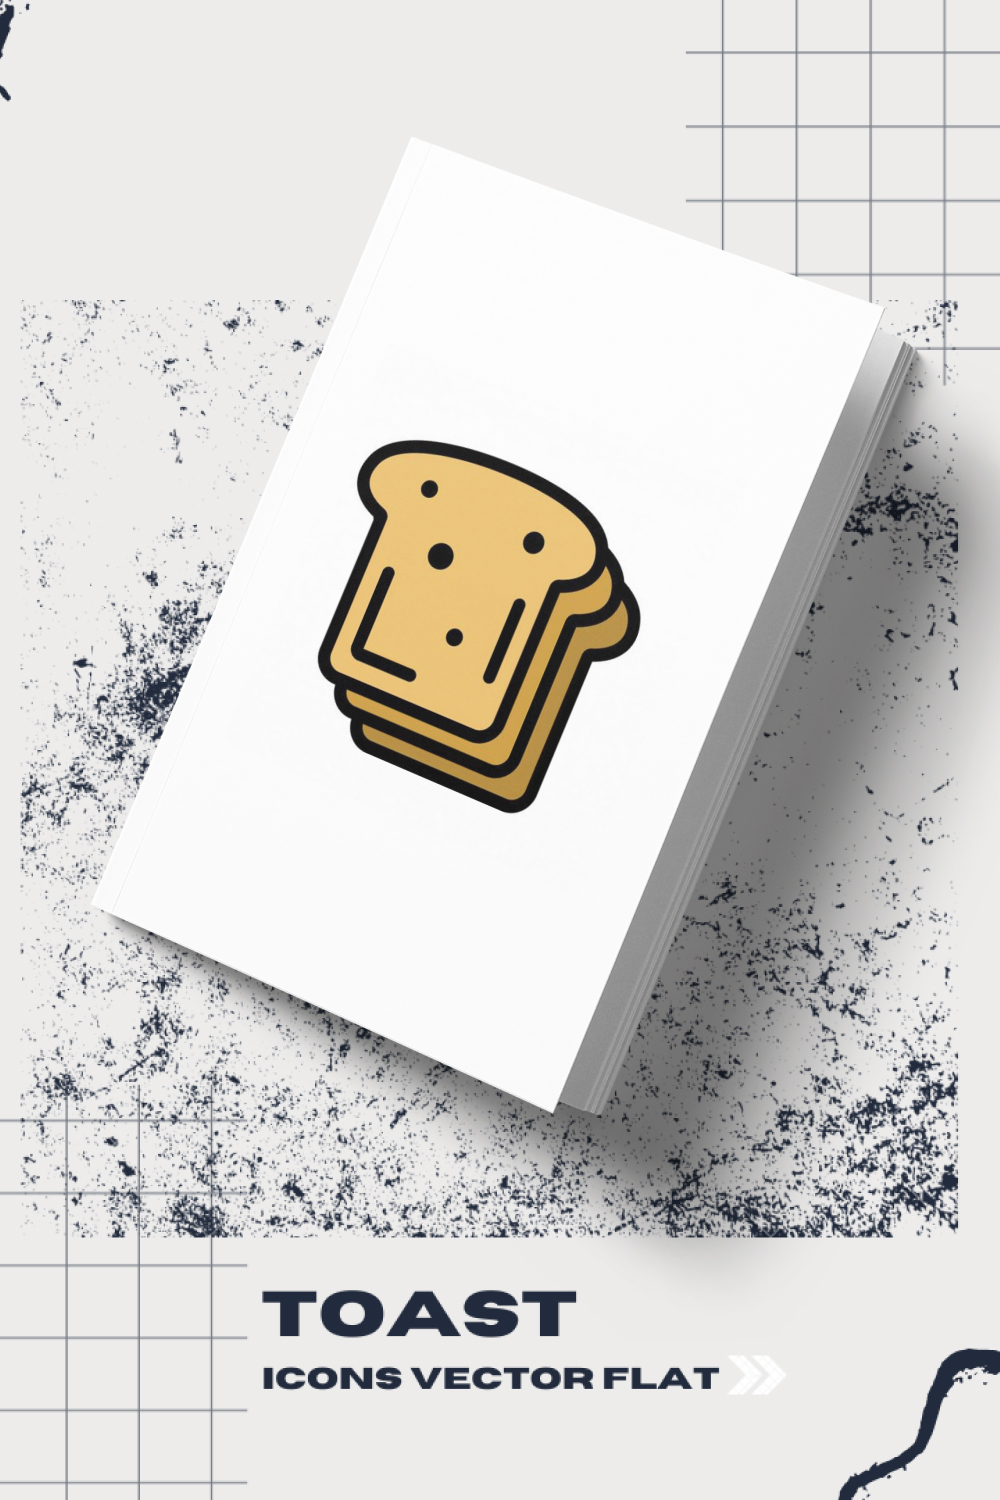 Toast icons vector flat of pinterest.